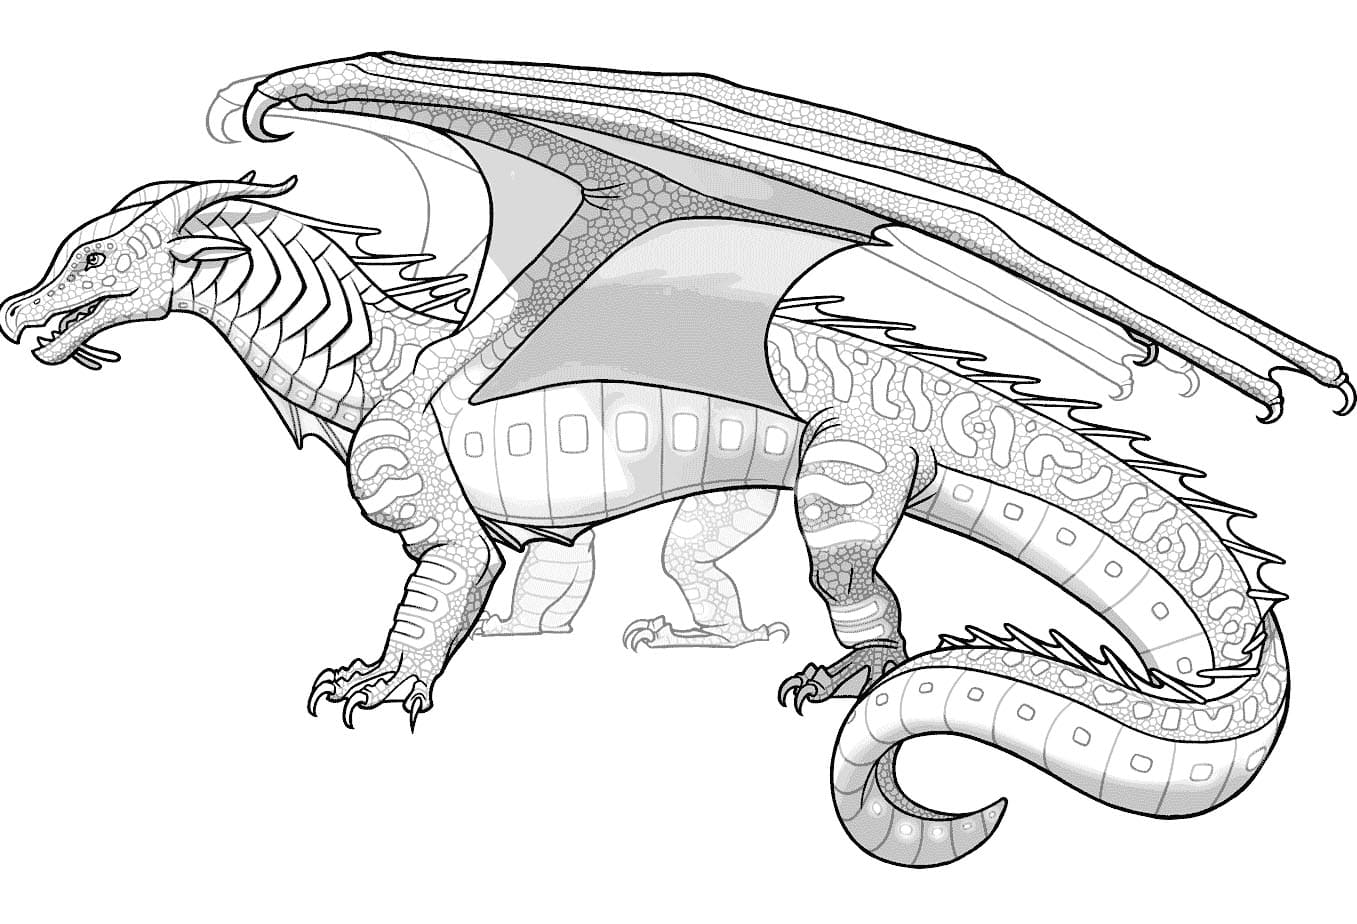 Wings of fire coloring pages